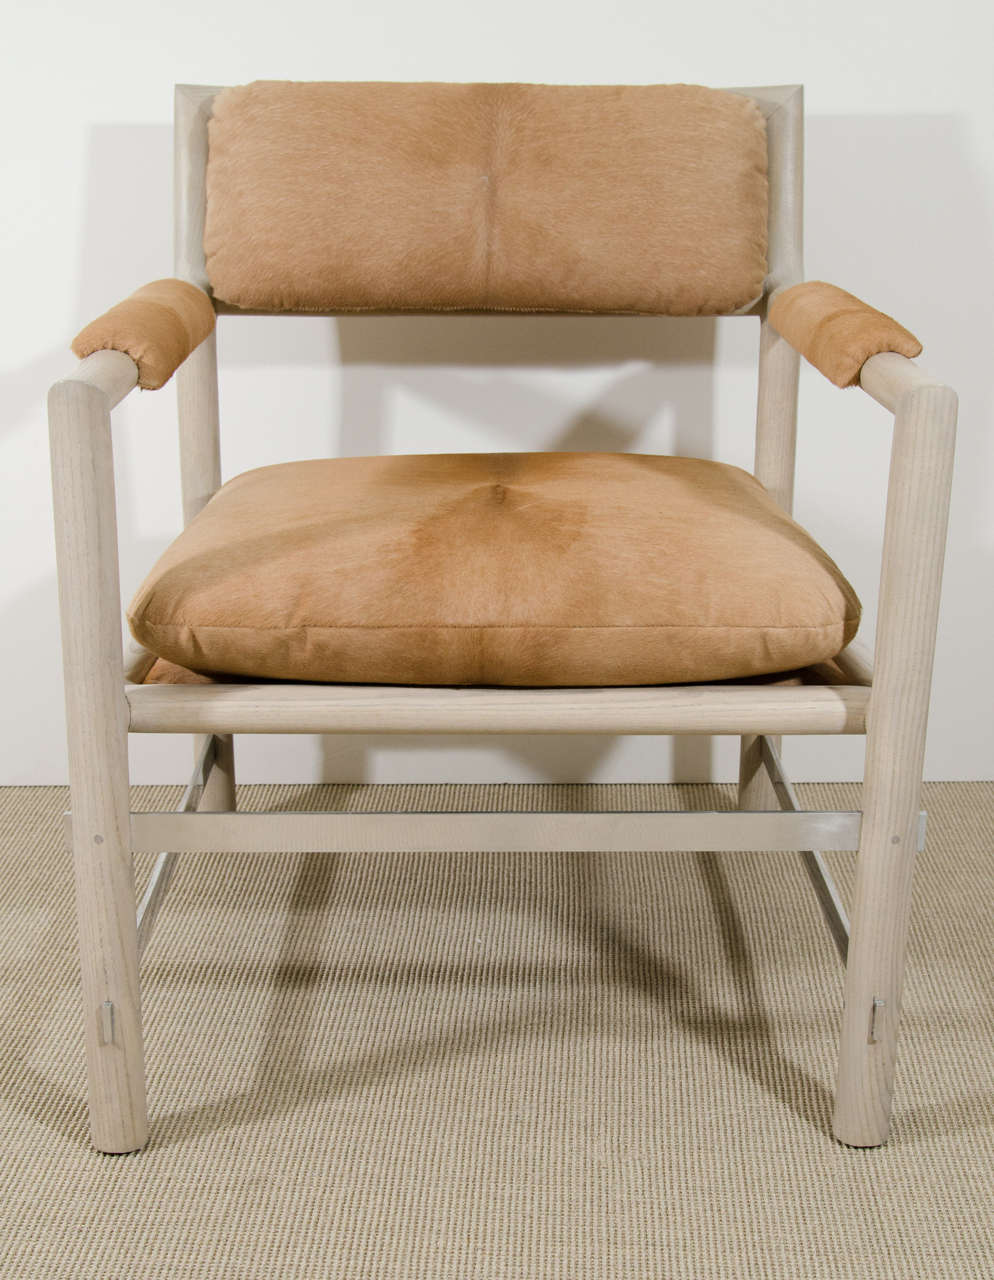 Pair of Edward Wormley for Dunbar cerused ash and stainless steel chairs reupholstered in cowhide, circa 1960, USA.